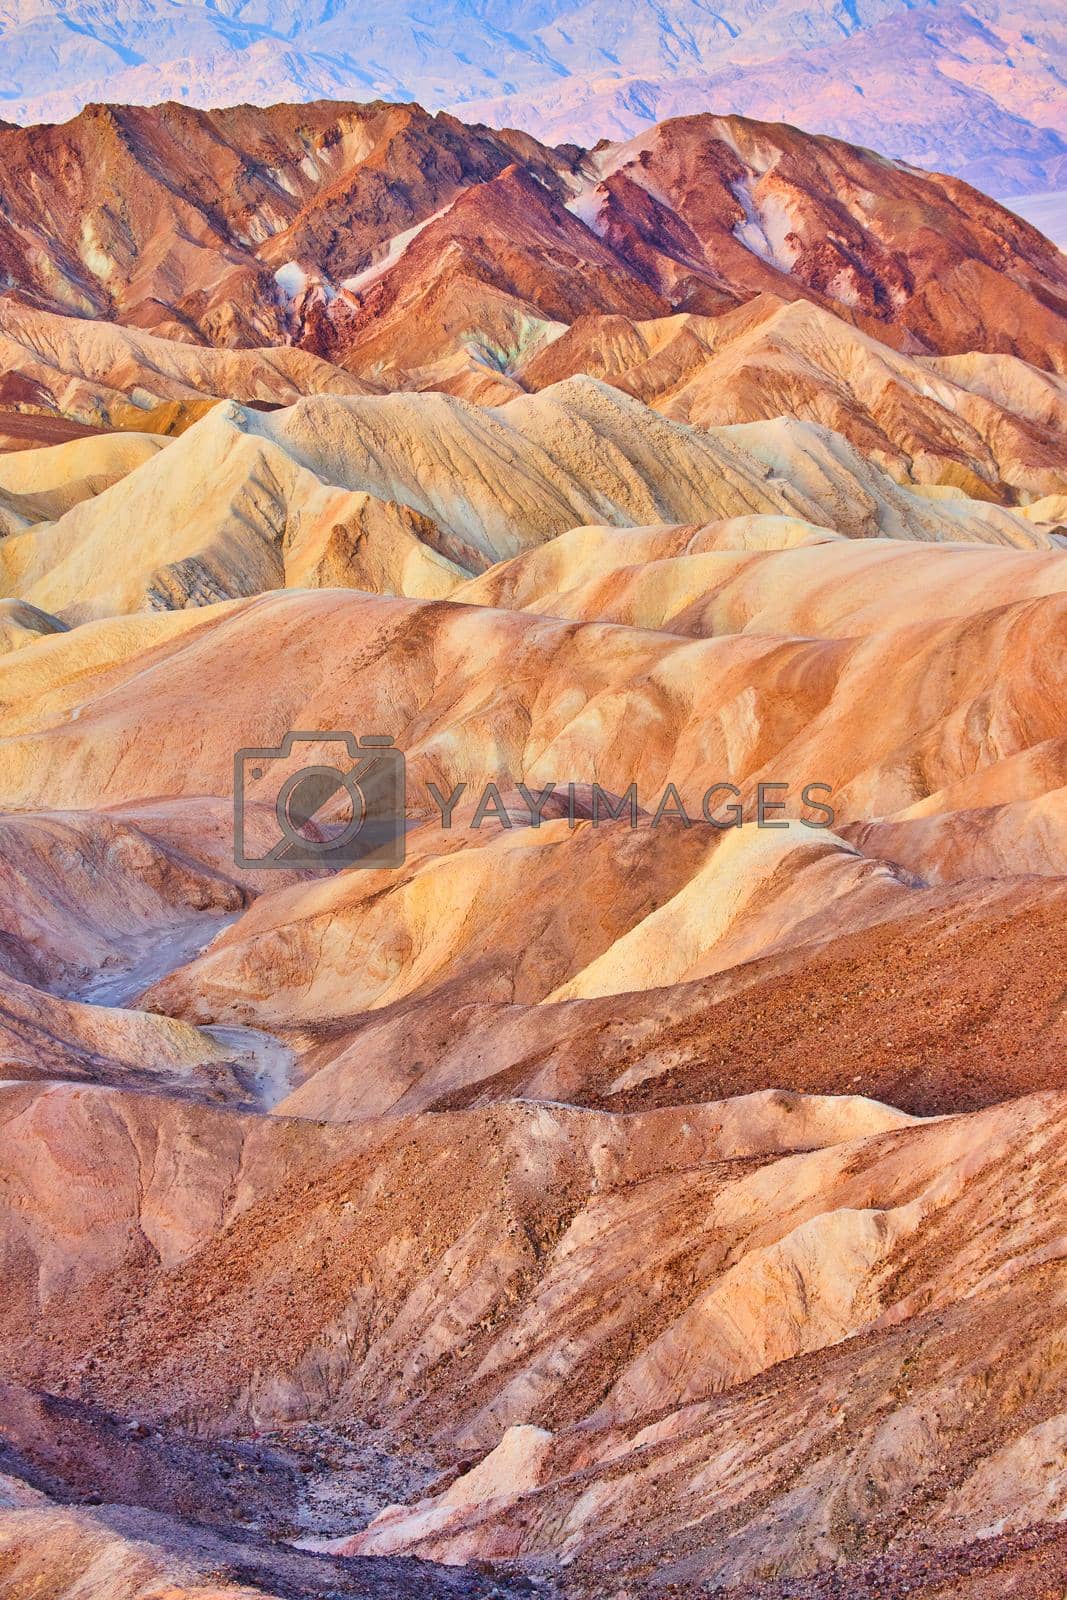 Royalty free image of Endless ripples of color cover desert mountains at Zabriskie Point by njproductions